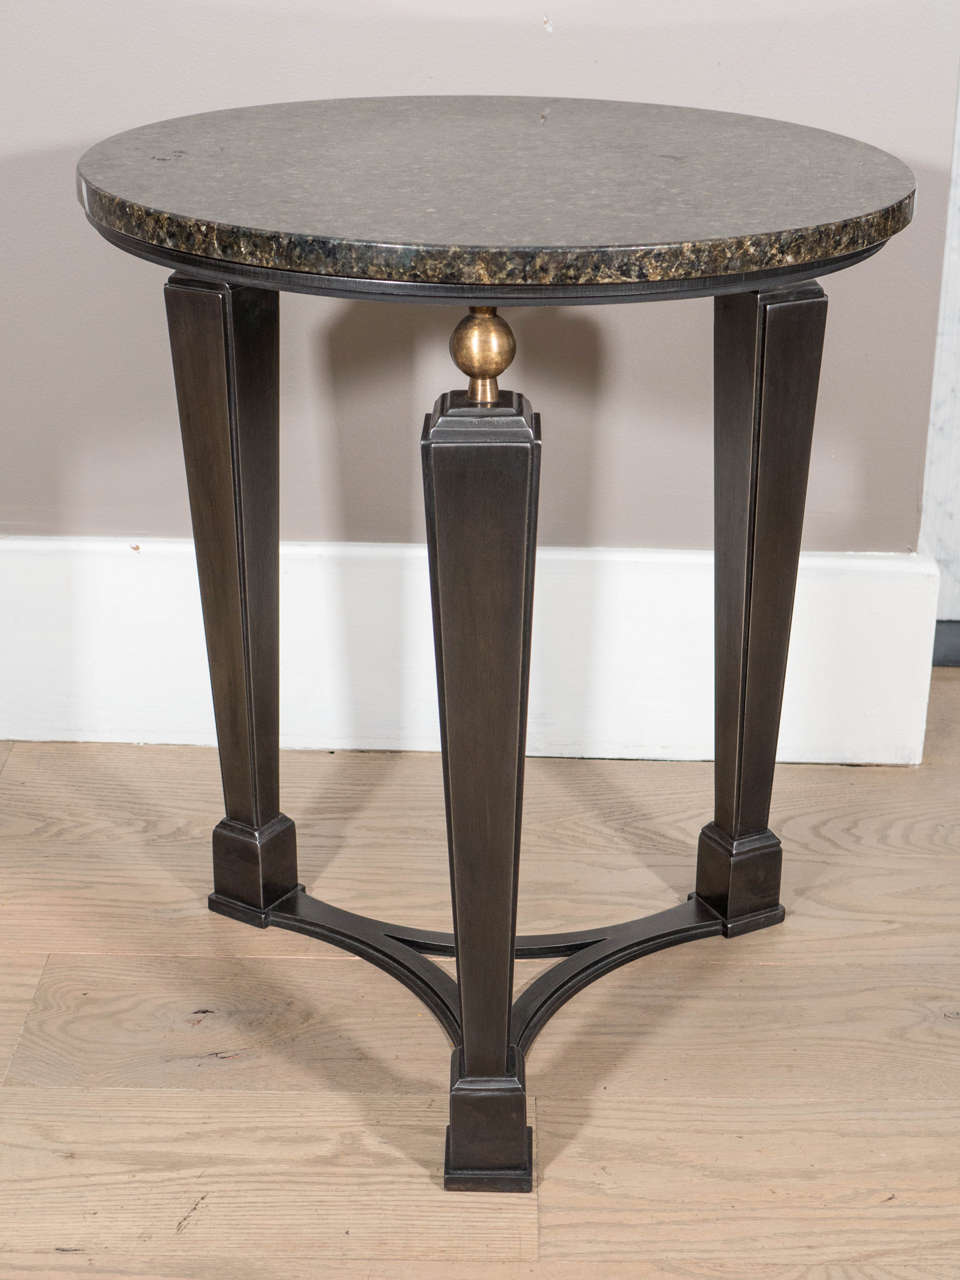 Circular Art Deco Inspired Three Legged Metal Side Table with Bronze Base In Excellent Condition For Sale In Long Island City, NY